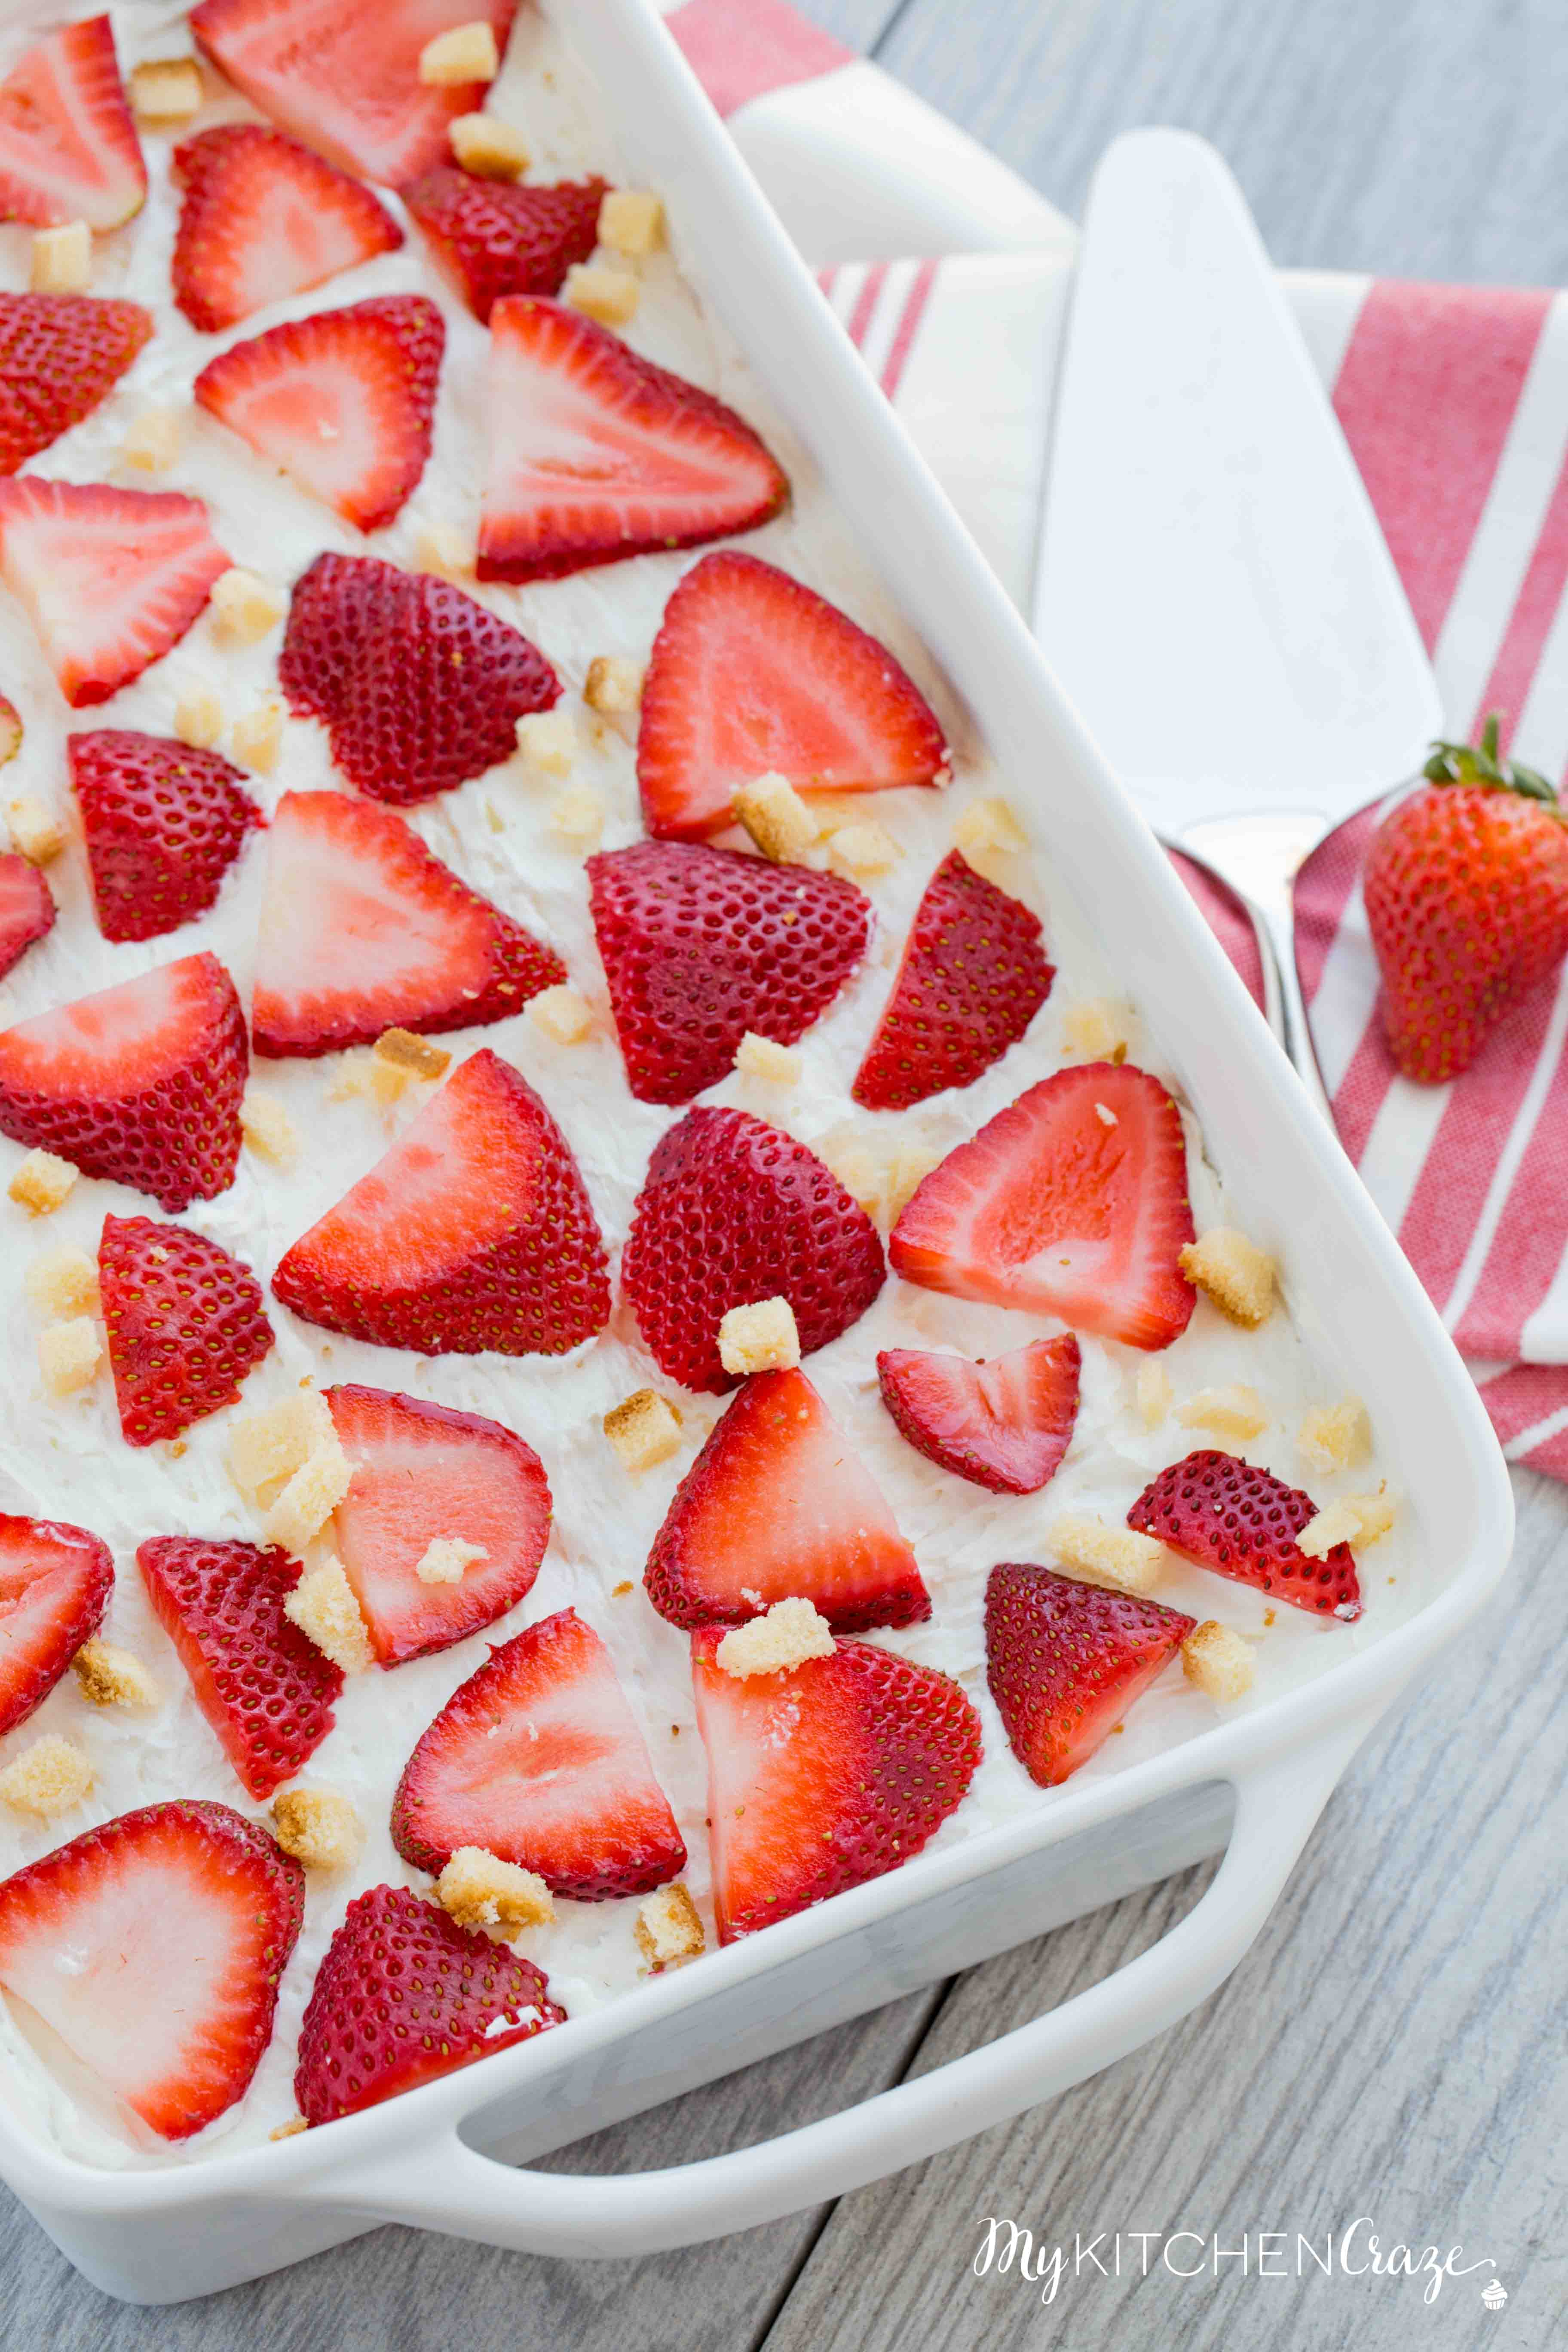 Strawberry Tiramisu ~ mykitchencraze.com ~ Enjoy this delicious and fun twist on tiramisu! Loaded with strawberries, pound cake, mascarpone cheese and cool whip. This is one dessert you won't be able to pass up!